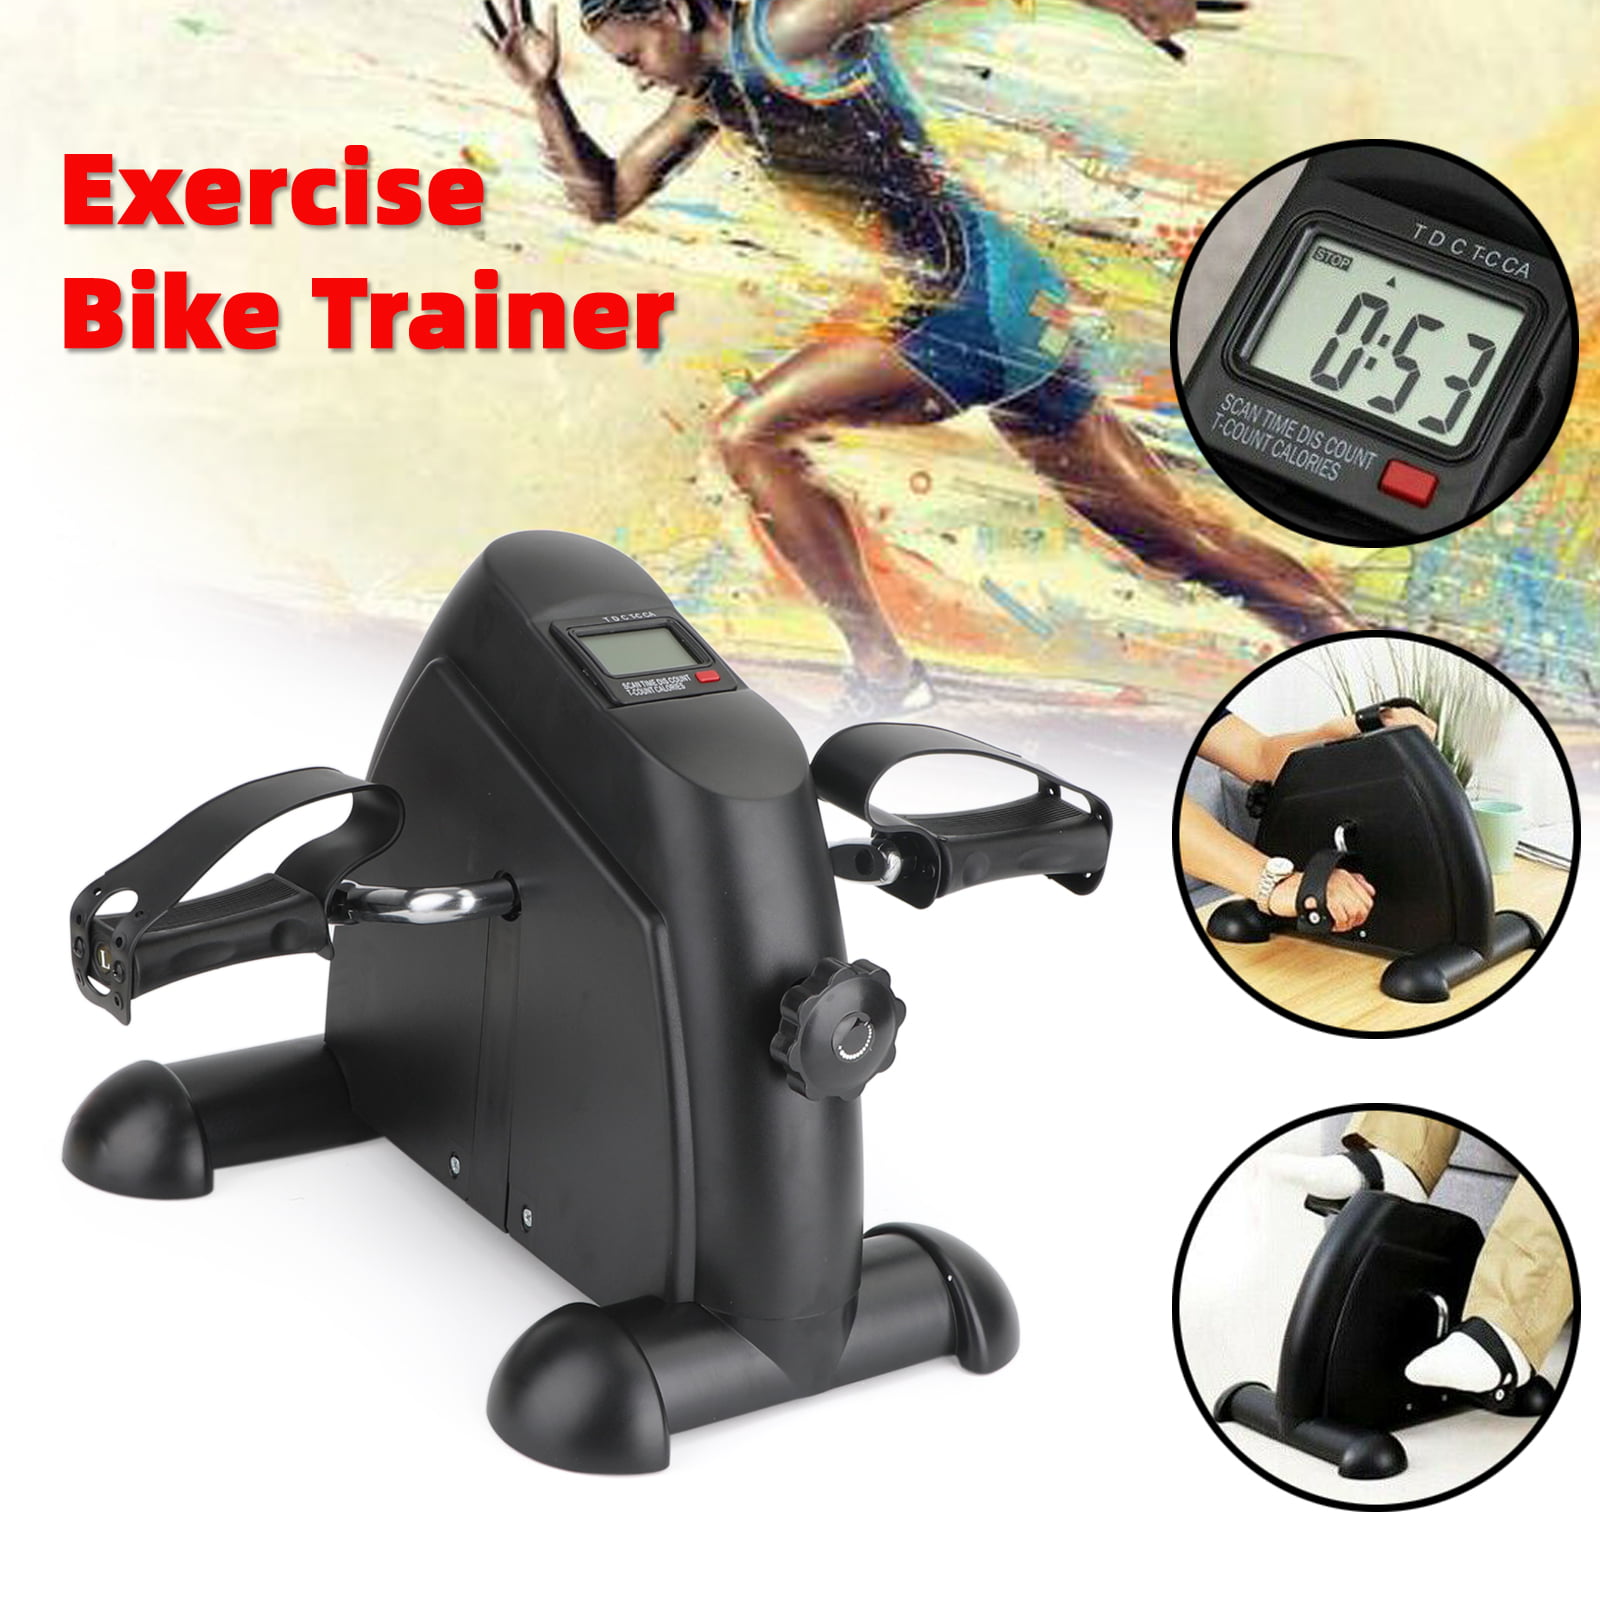 Details about   Portable Home Cardio Mini Stepper Pedal Exercise Bike Cycle Leg Equipment/Sport 